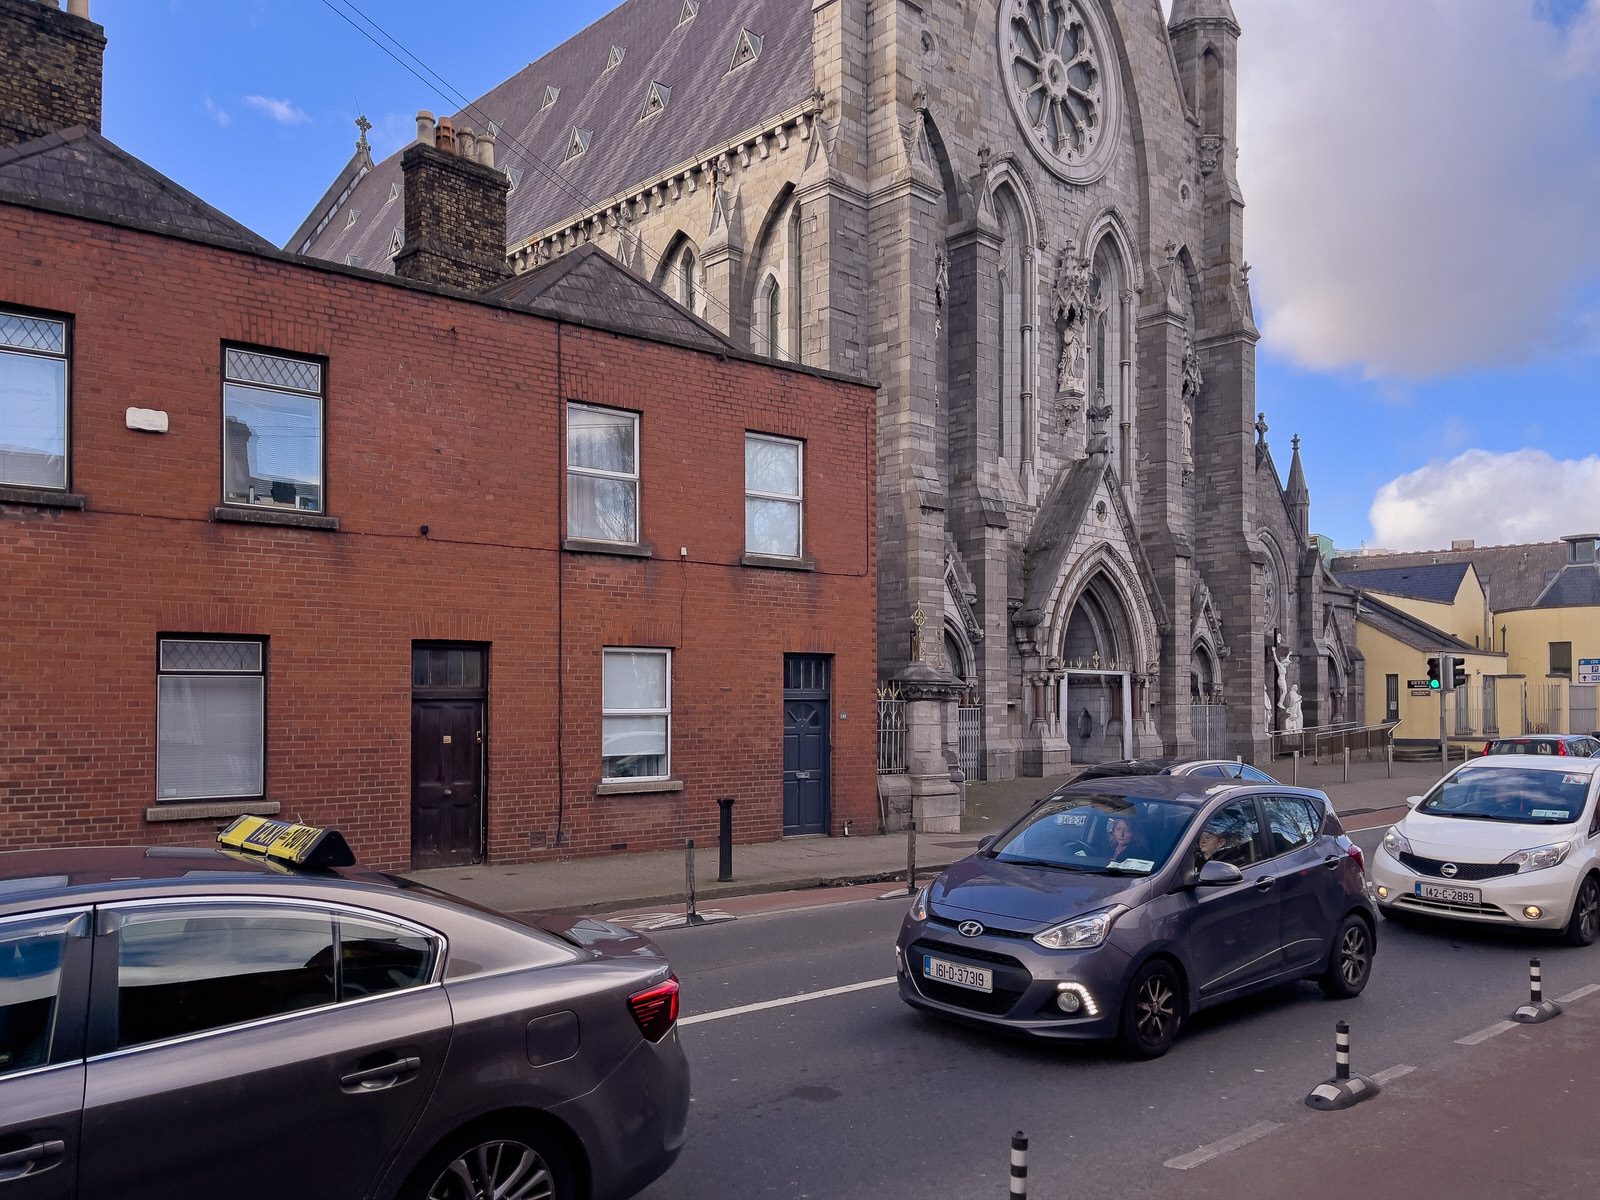 THE CAPUCHIN FRIARY ON CHURCH STREET [ST MARY OF THE ANGELS IS NOT A PARISH CHURCH]-228466-1